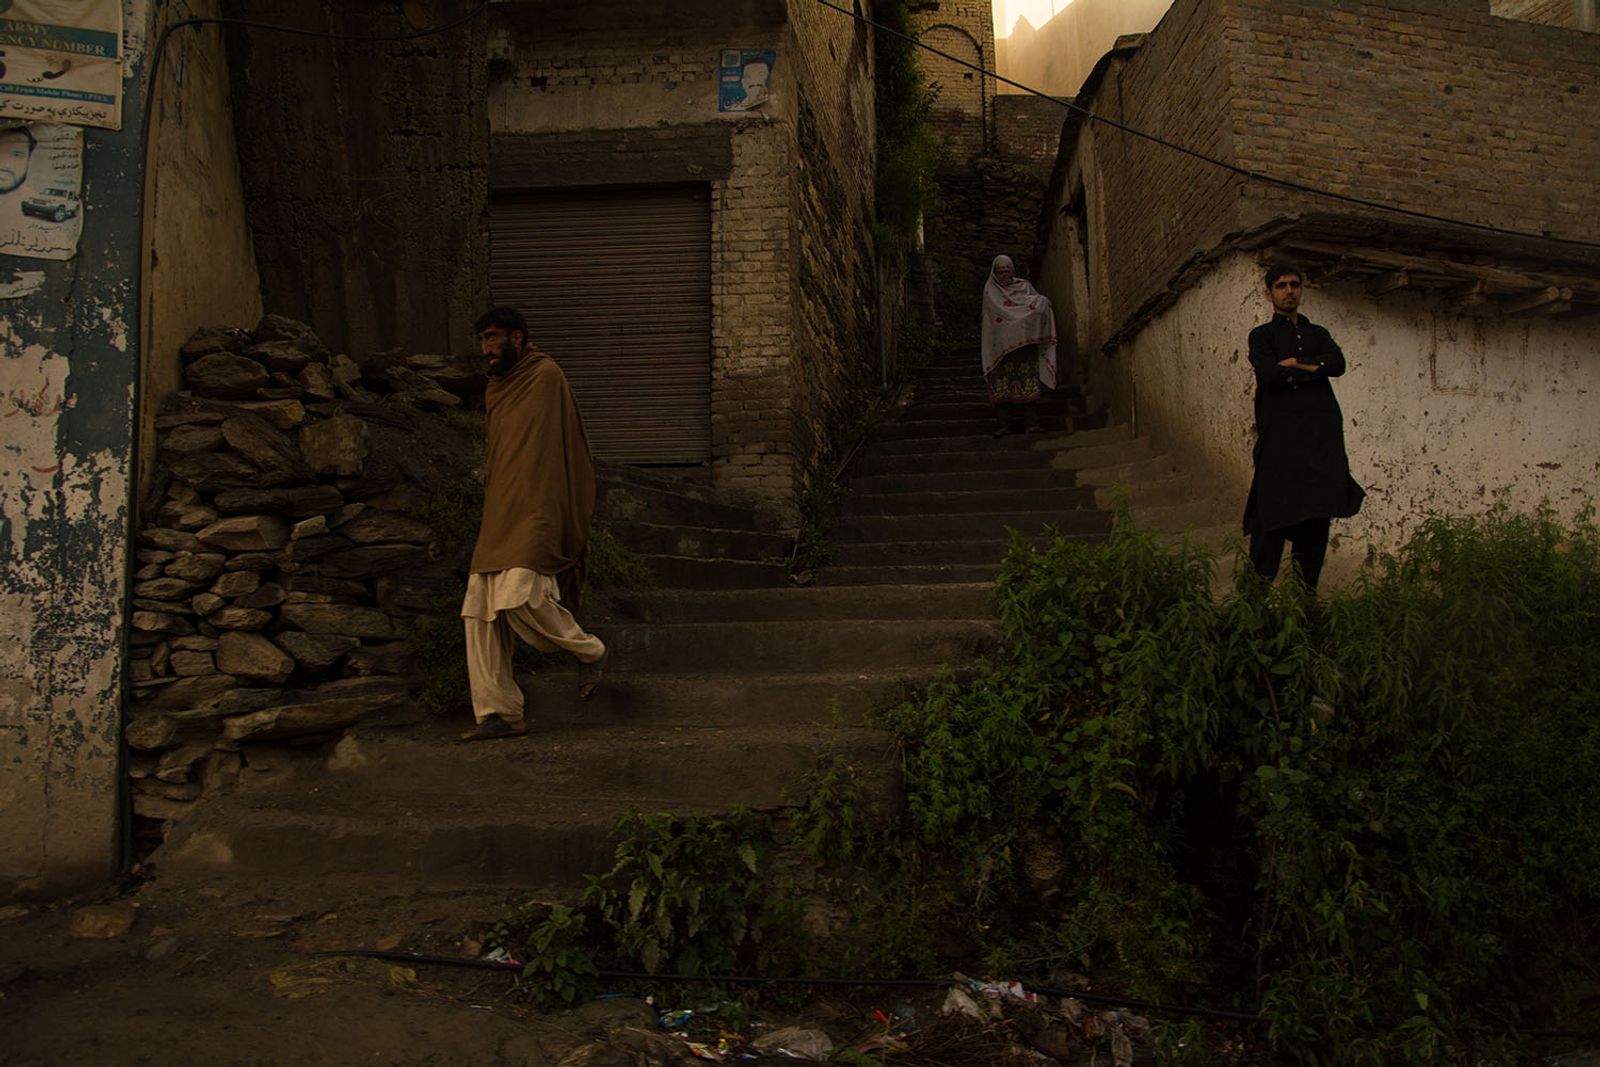 © Nazia Akram - Image from the Swat Valley - Pakistan photography project